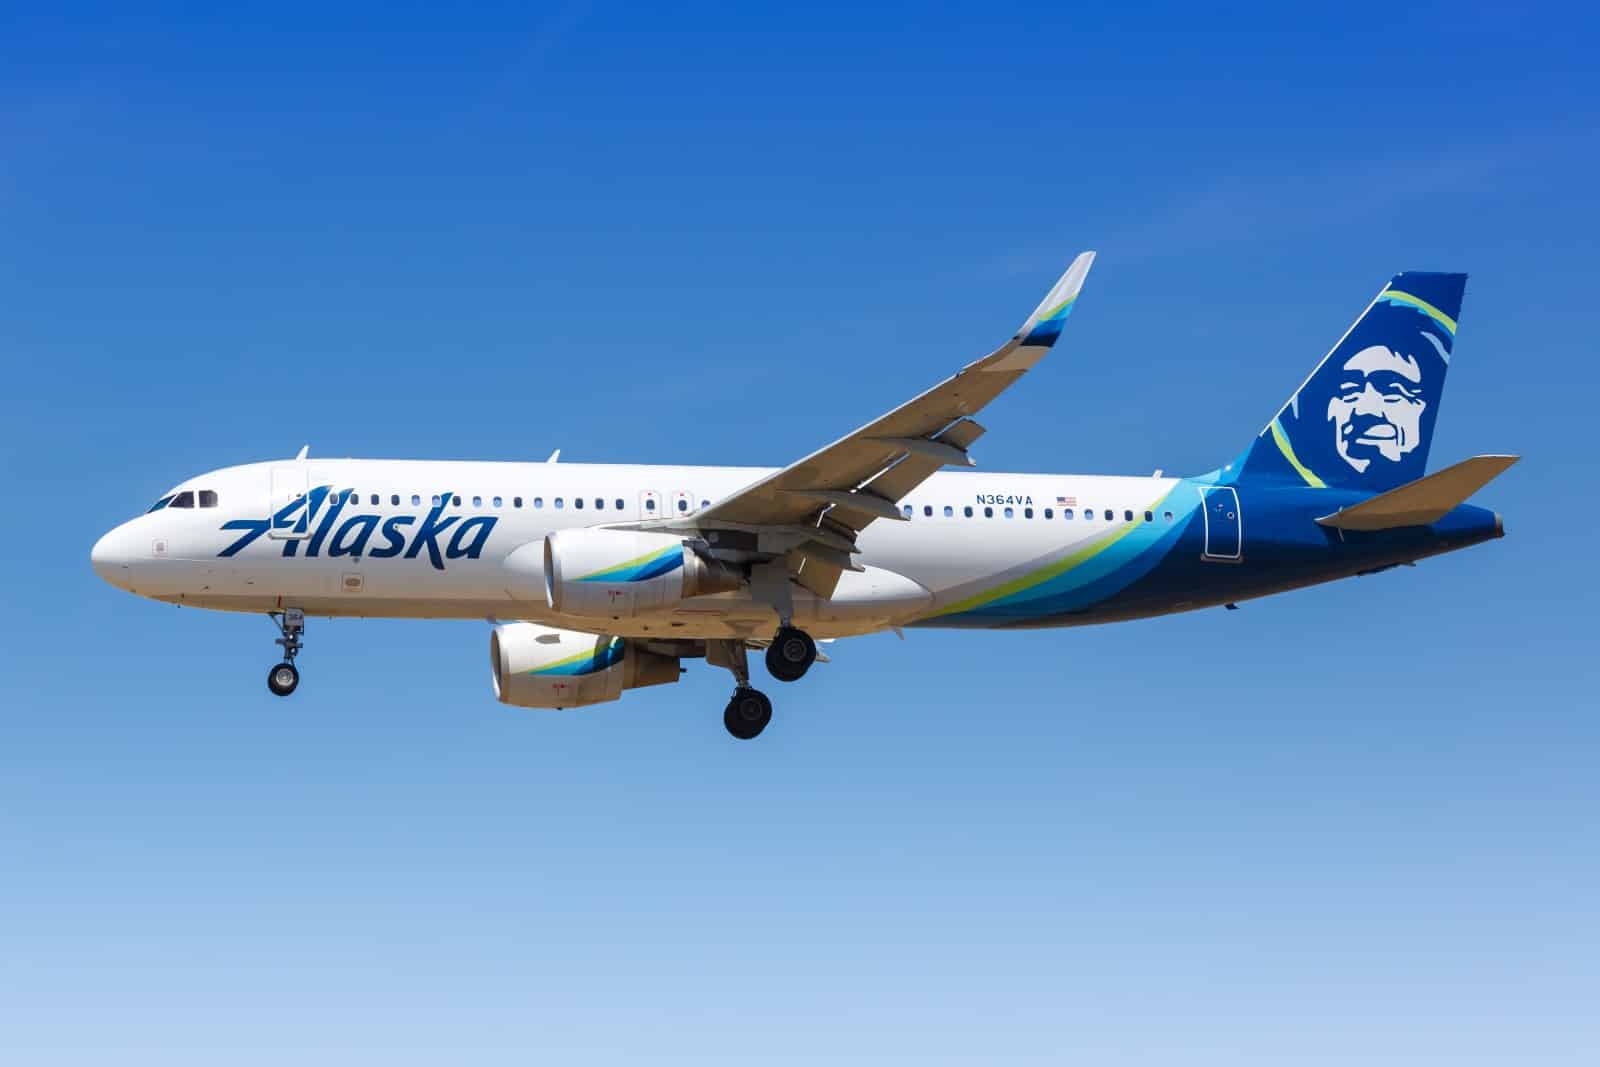 <p><span>Alaska Airlines Mileage Plan is highly regarded for the high value of its miles and its extensive network of airline partners. Members earn miles for flights with Alaska Airlines and its global partners, which can be redeemed for travel on Alaska Airlines and its partners.</span></p> <p><span>The program offers generous upgrade policies for elite members and unique perks like a free checked bag. One of the standout features of the Mileage Plan is the ability to book stopovers on award flights, allowing you to visit multiple destinations for the price of one. </span></p> <p><b>Insider’s Tip: </b><span>Look out for frequent flyer promotions to earn bonus miles.</span></p>